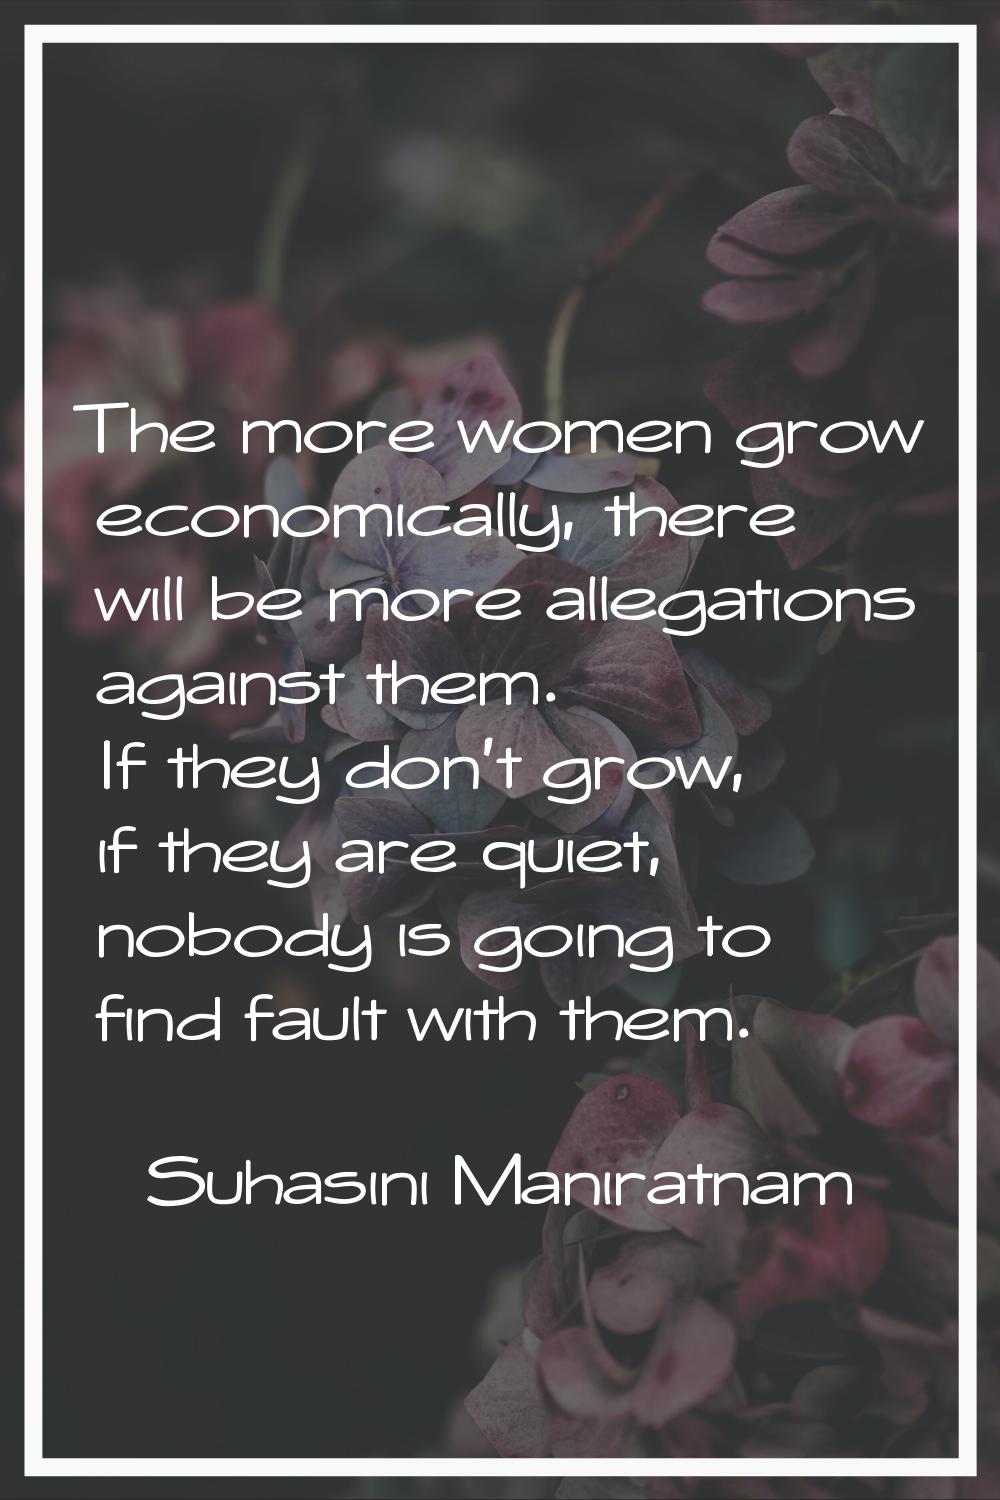 The more women grow economically, there will be more allegations against them. If they don't grow, 